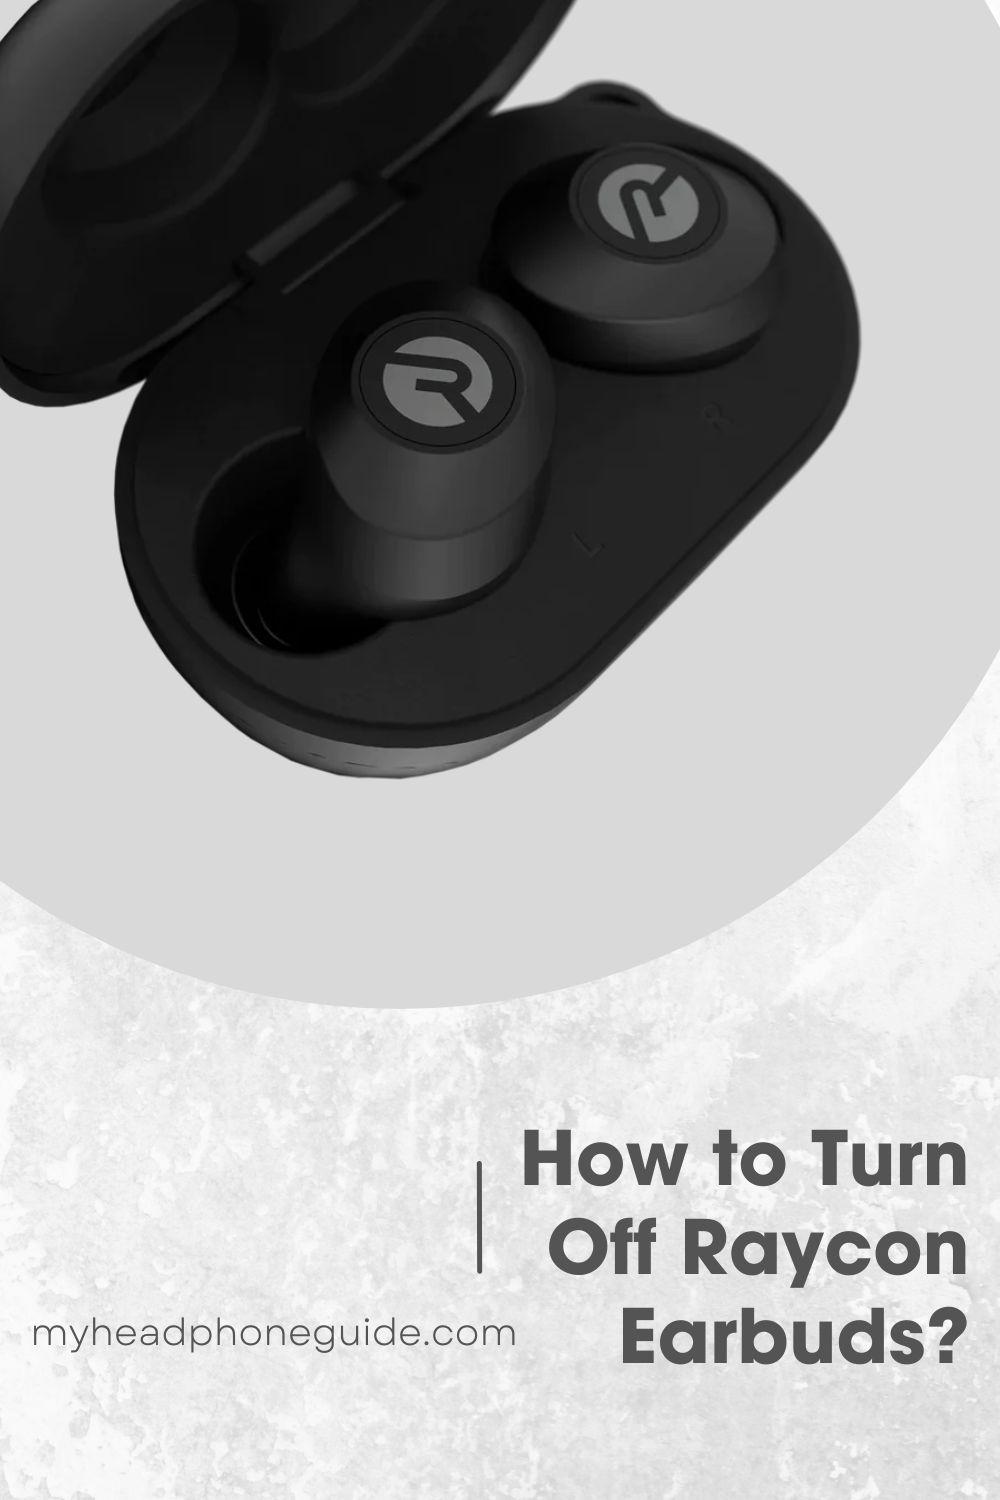 How to Turn Off Raycon Earbuds?